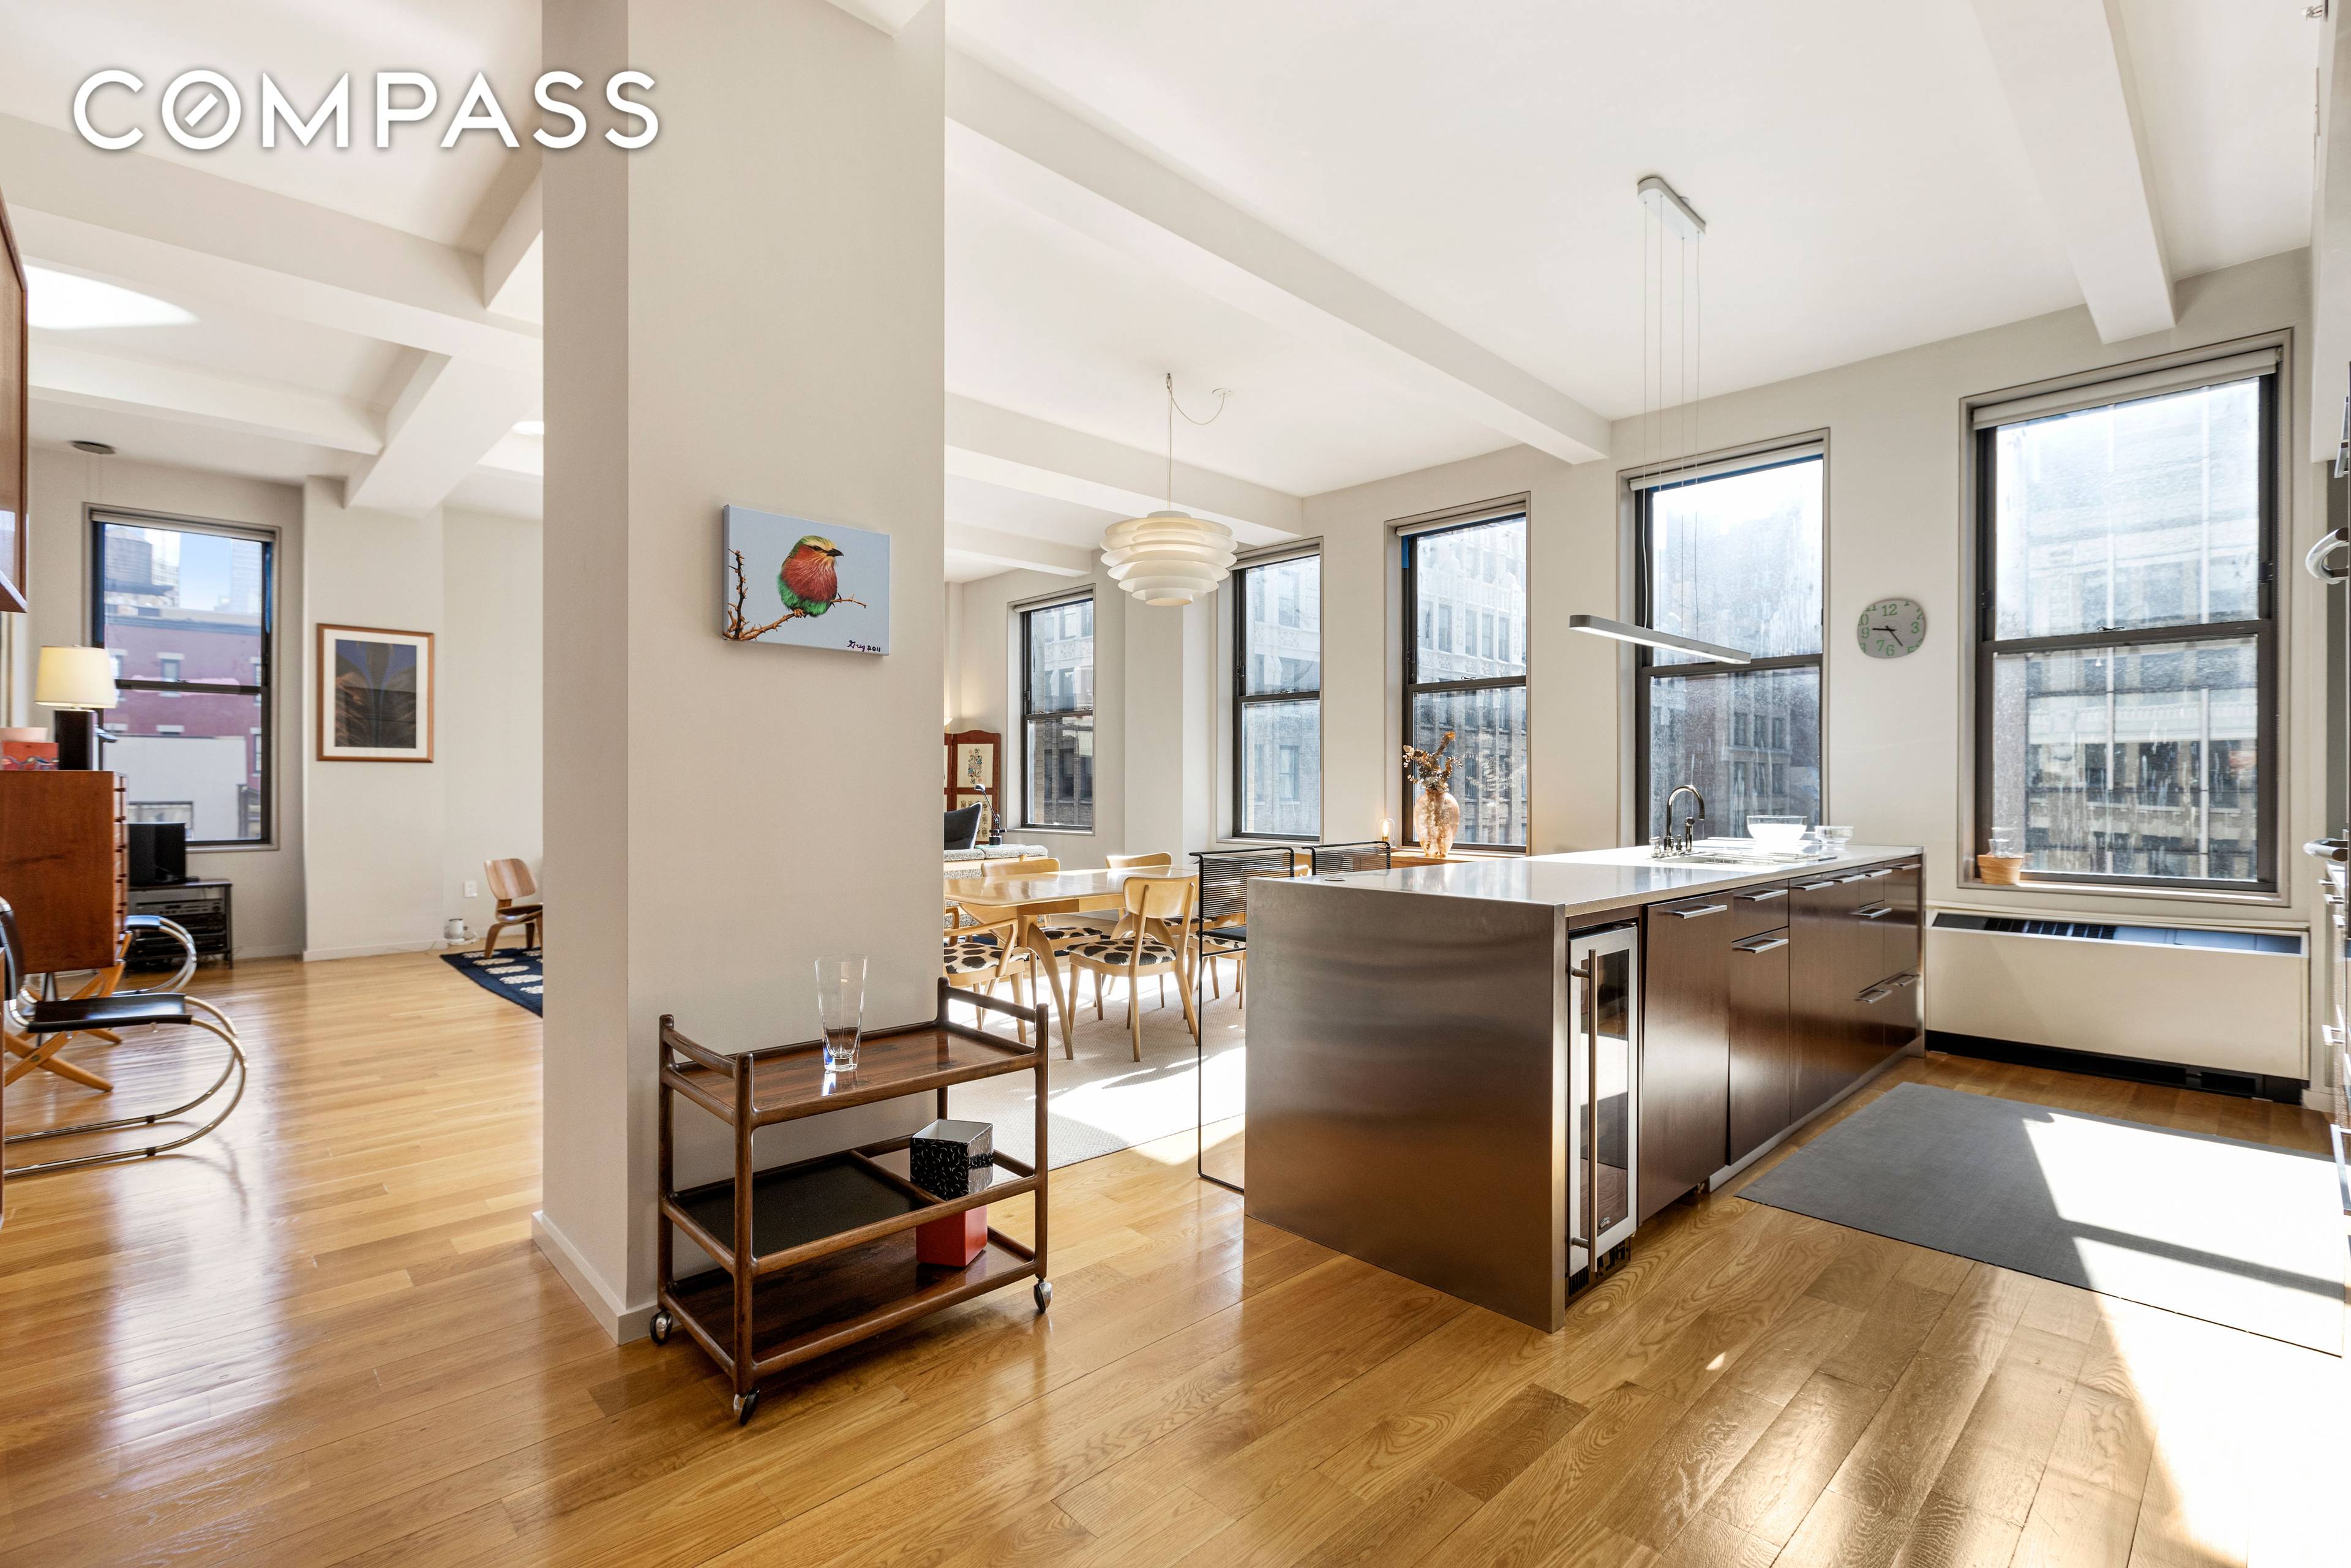 76 Madison Avenue, Apartment 10A is the epitome of luxury in the heart of NoMad.